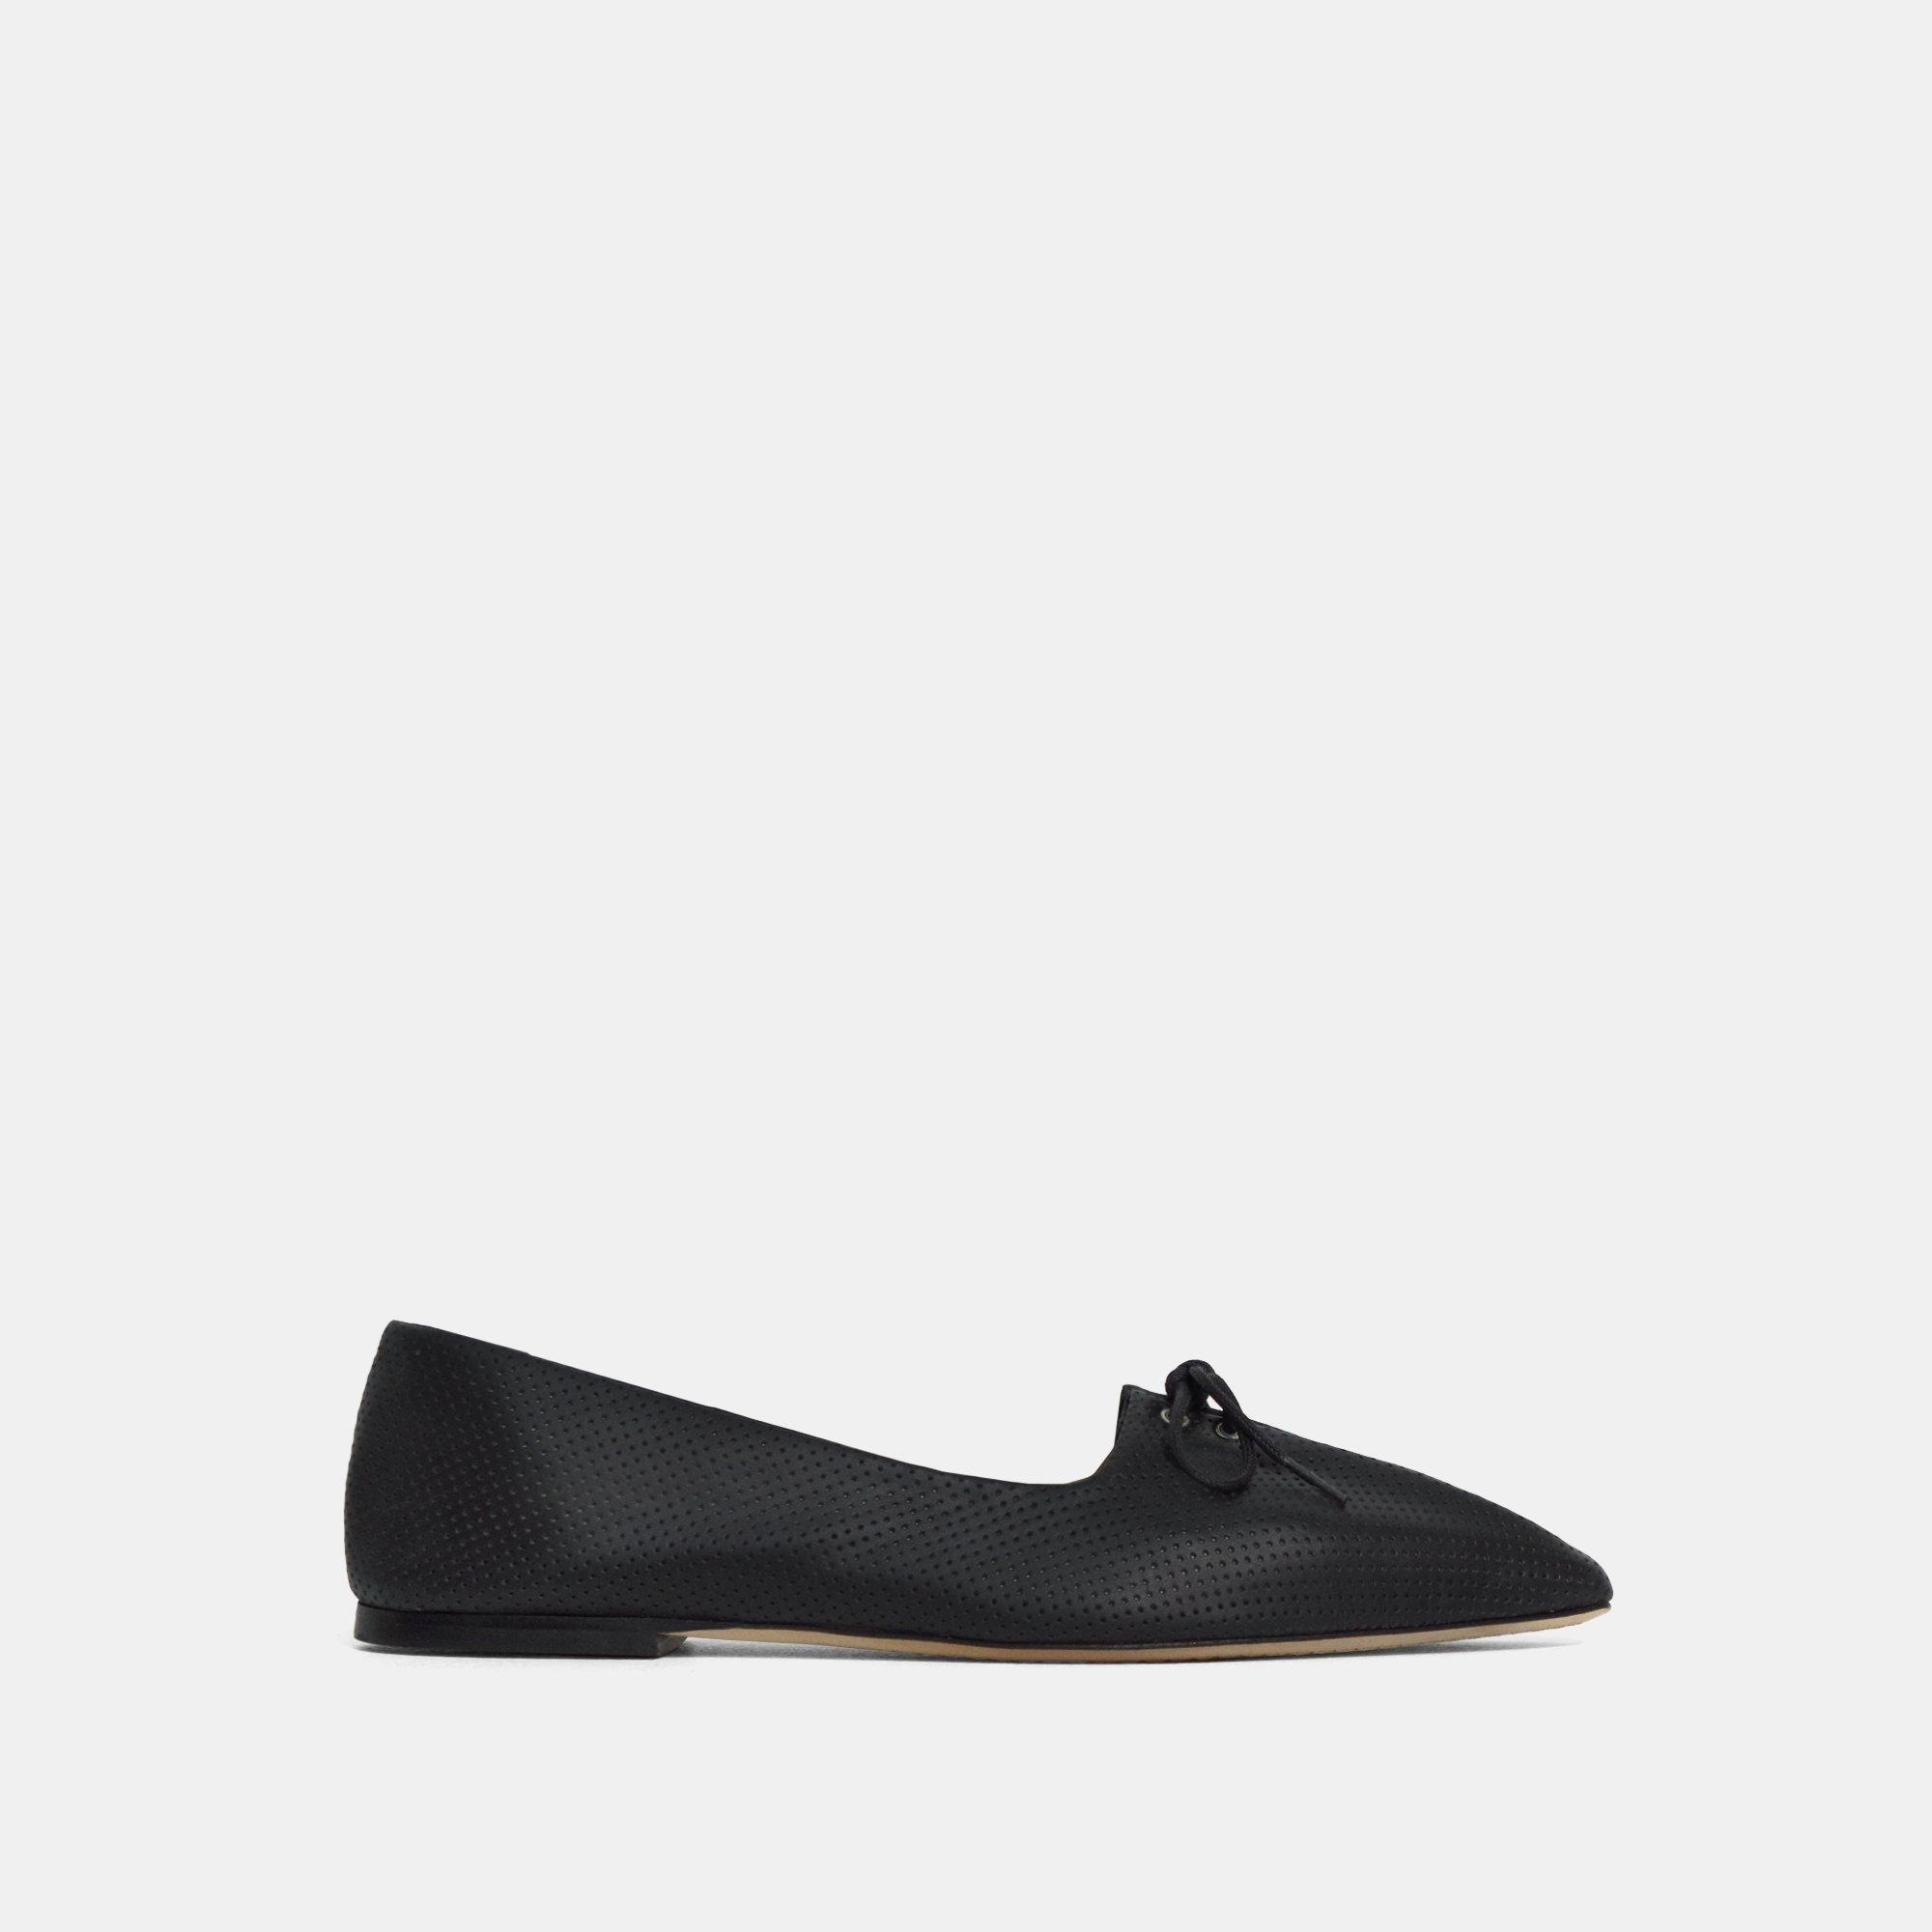 Theory Pleated Ballet Flat in Perforated Leather